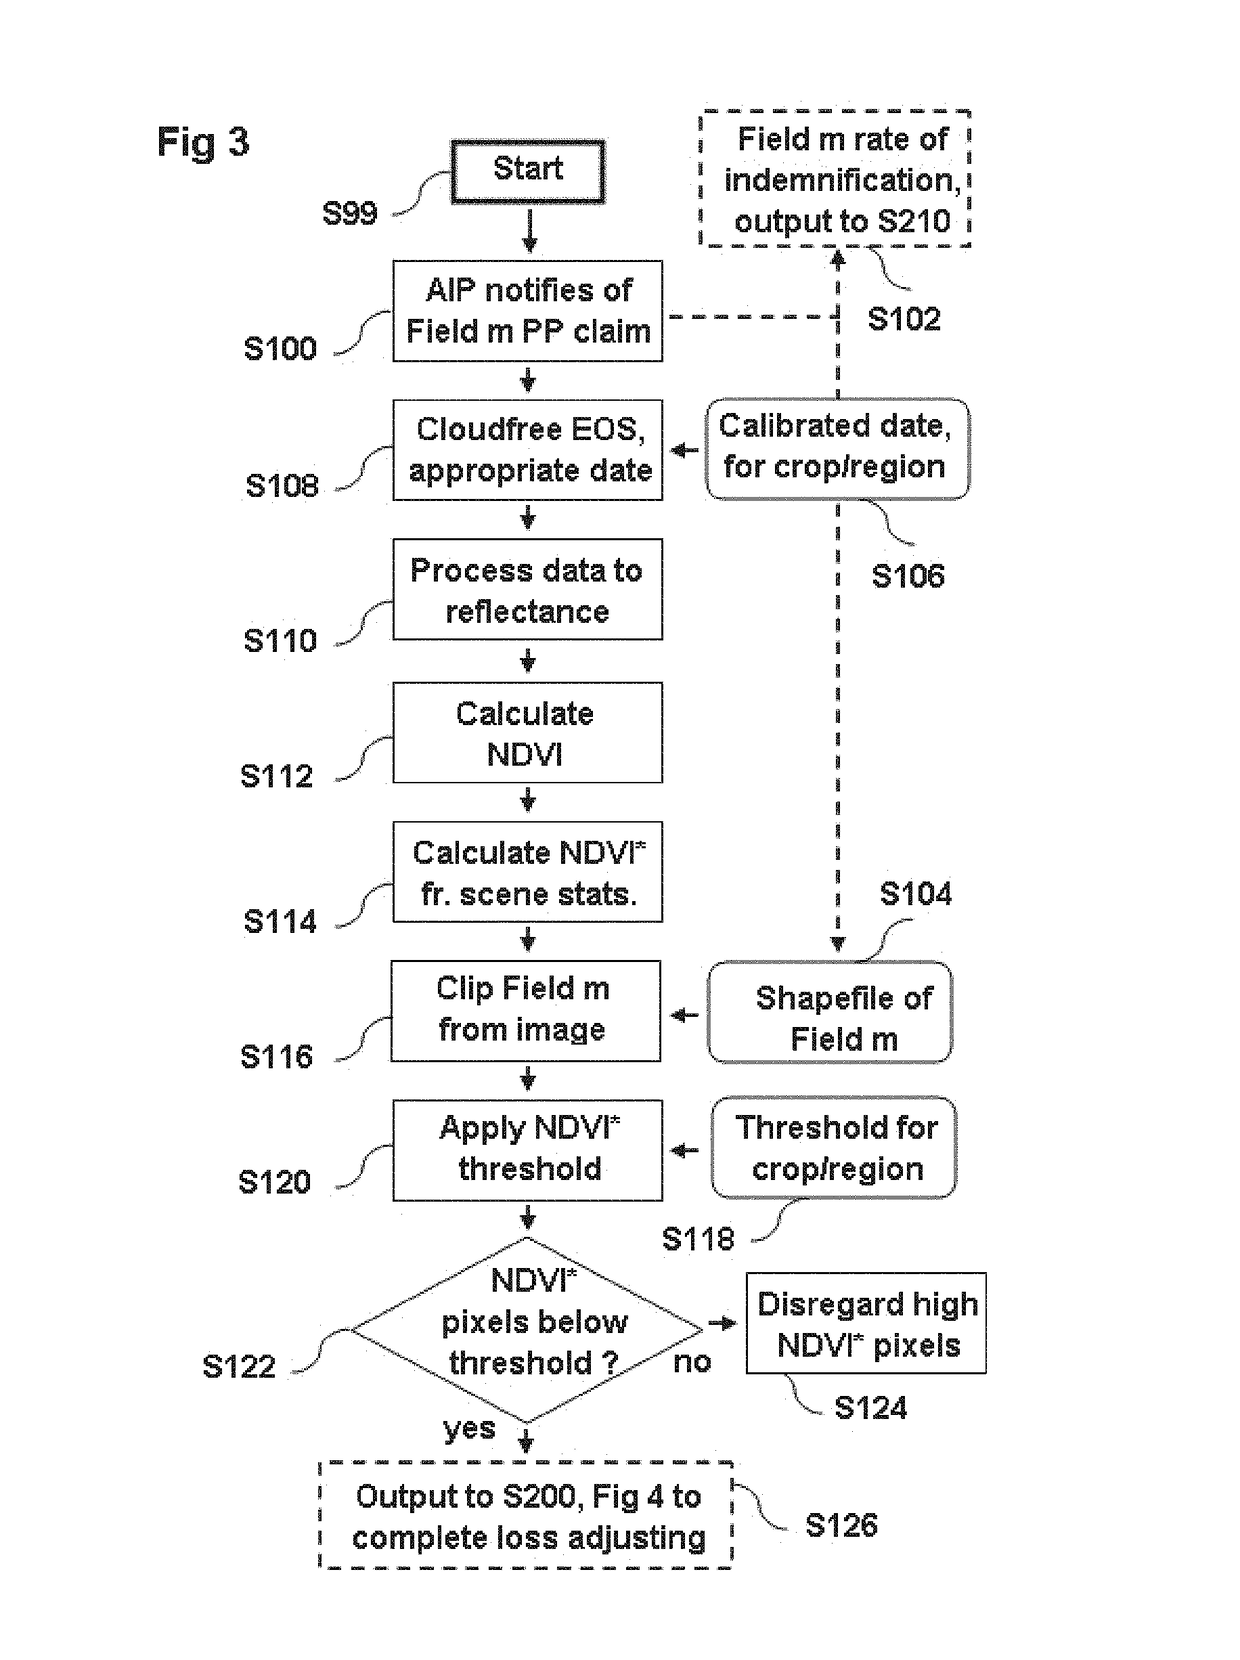 Method for automated crop insurance loss adjusting for prevented planting conditions